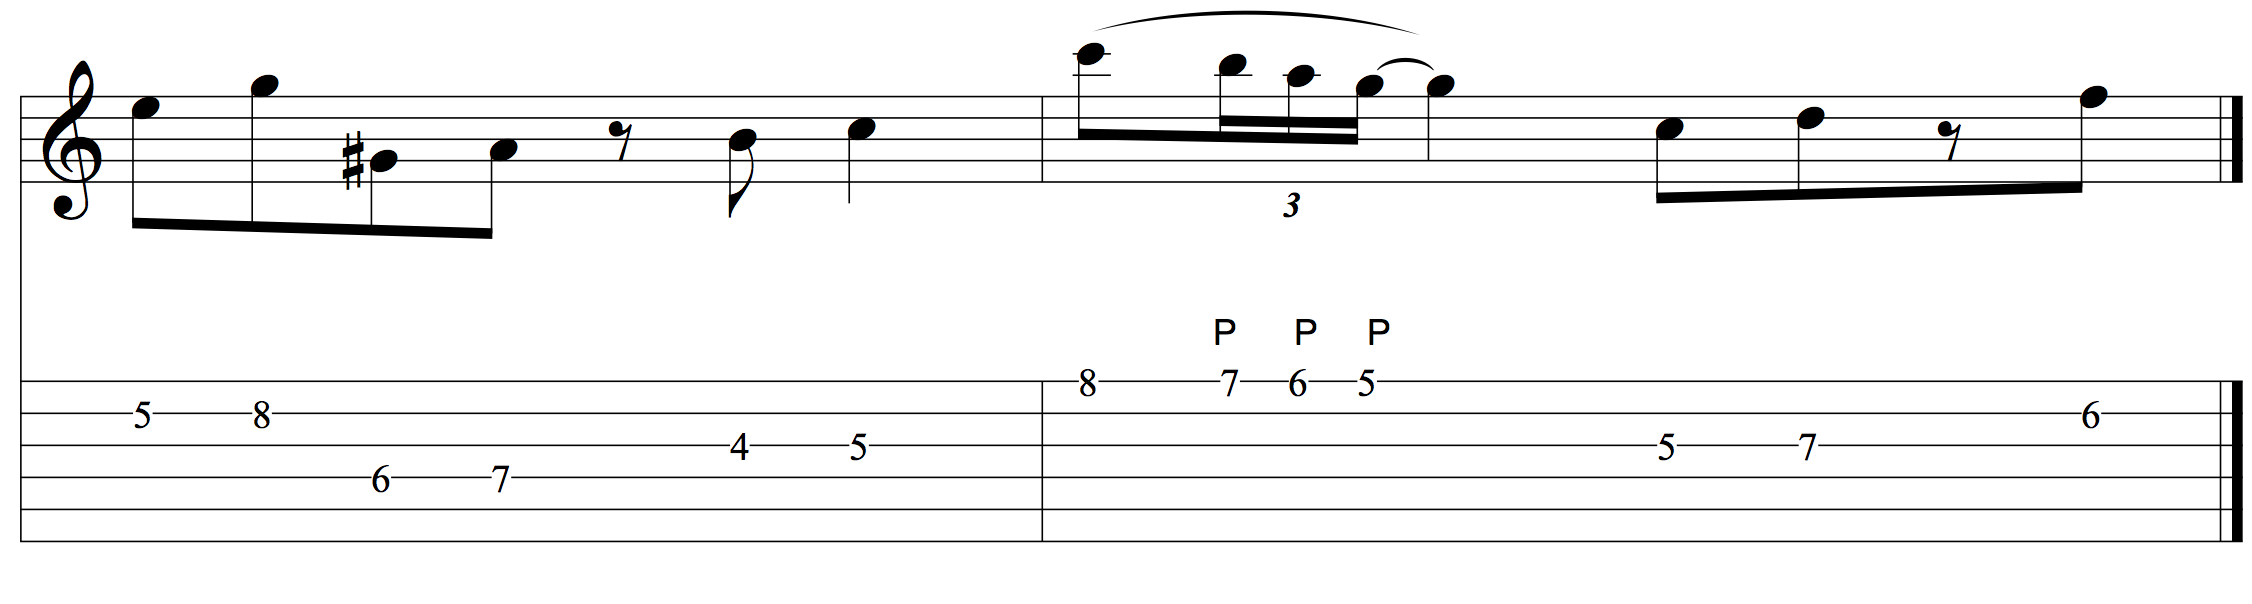 Practicing the three-note chromatic pull-off in context..